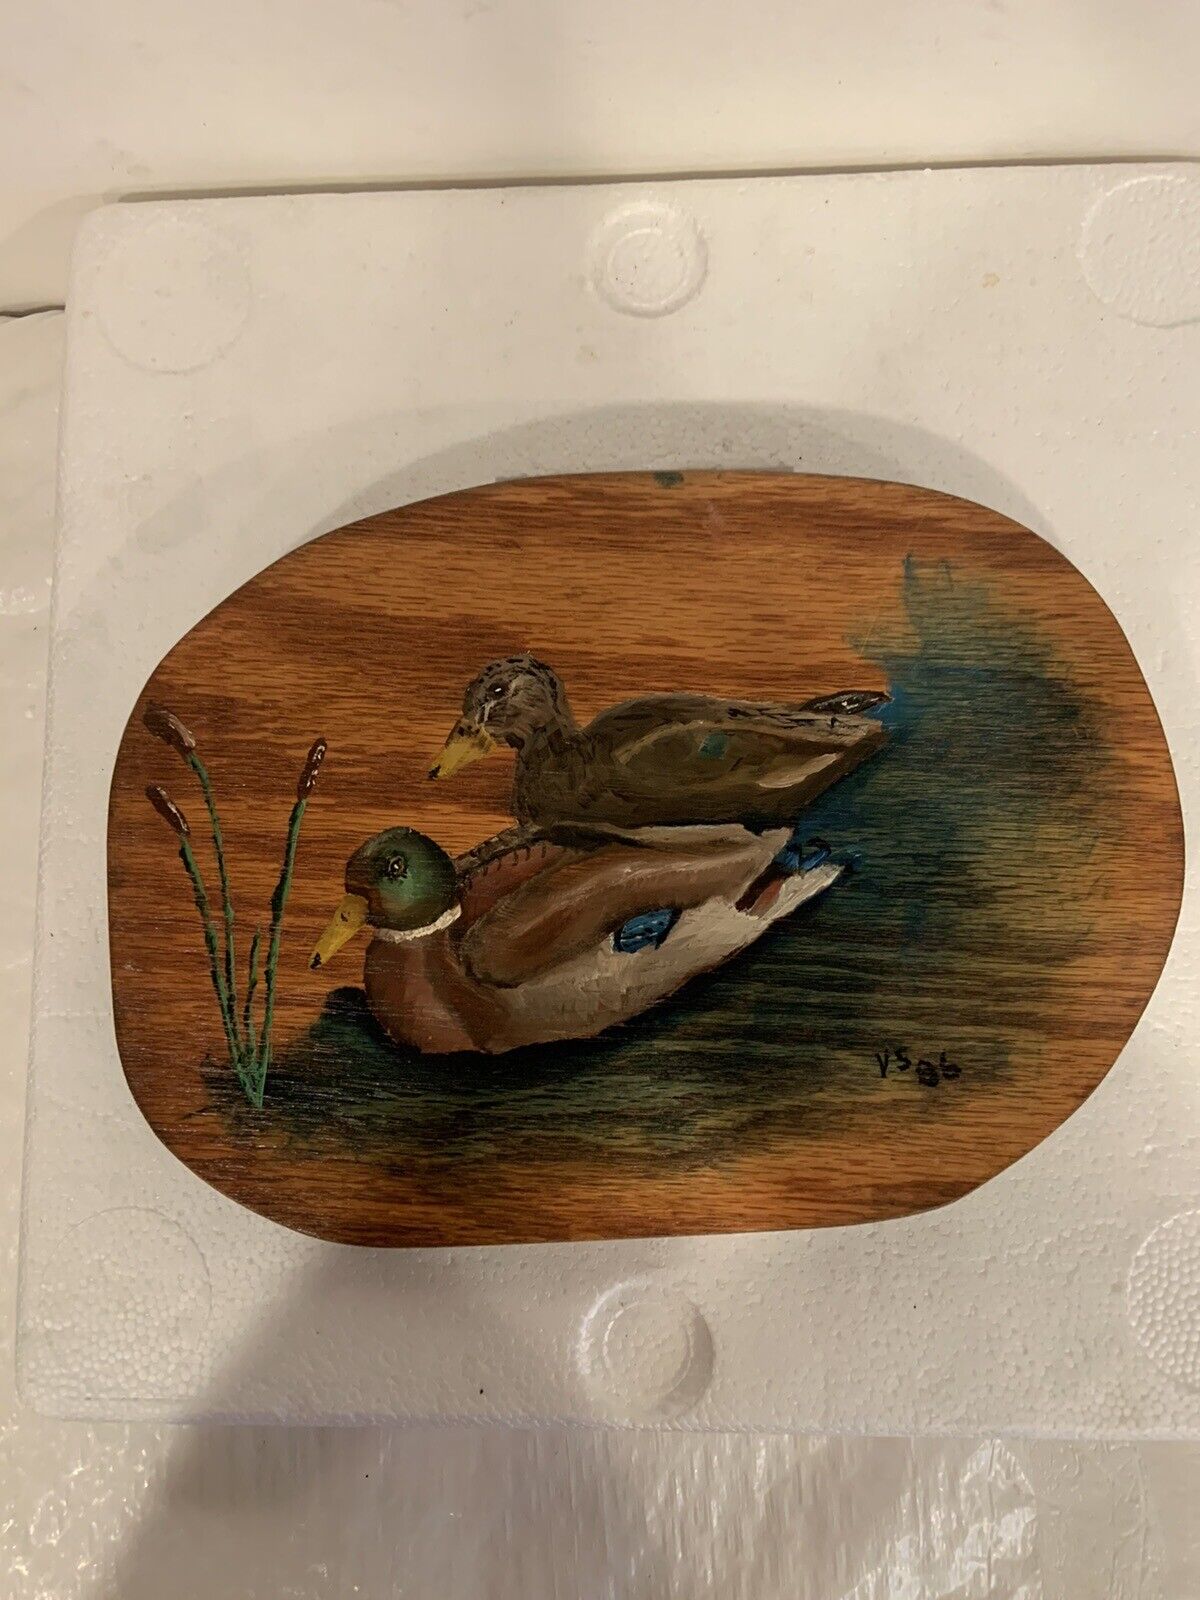 Vntg Wooden Mallard Duck Hand Painted Plaque Rare Signed VS 1986 NICE See Photos